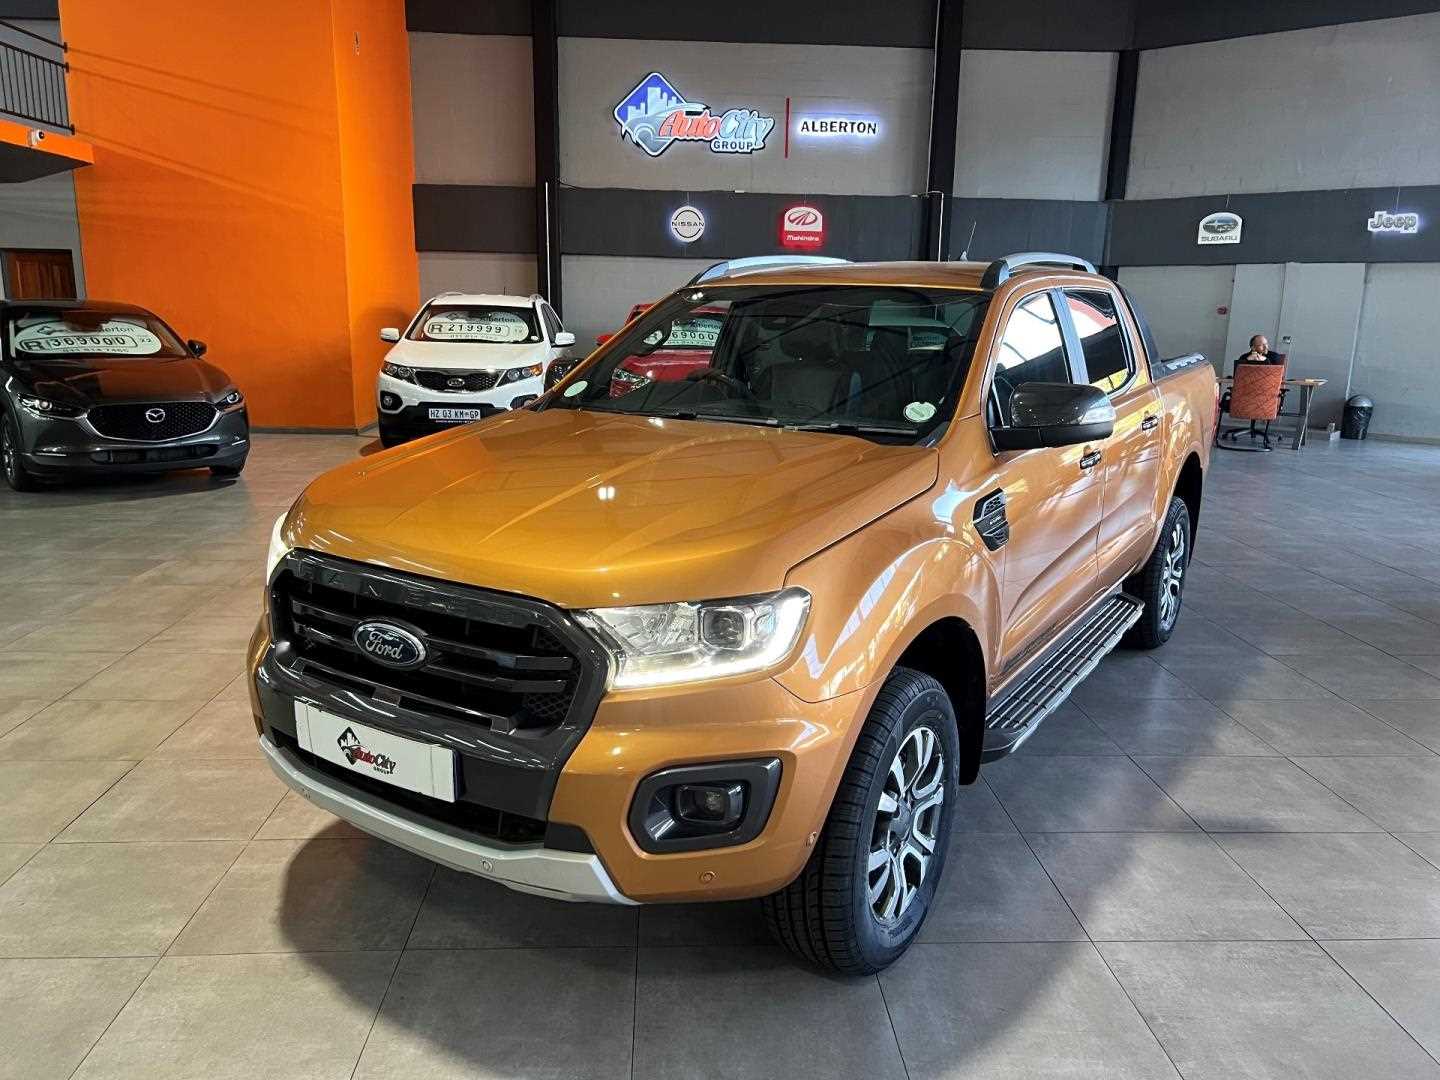 2021 Ford Ranger MY20.75 2.0 Bit 4X2 D Cab Wildtrak At for sale - 337852